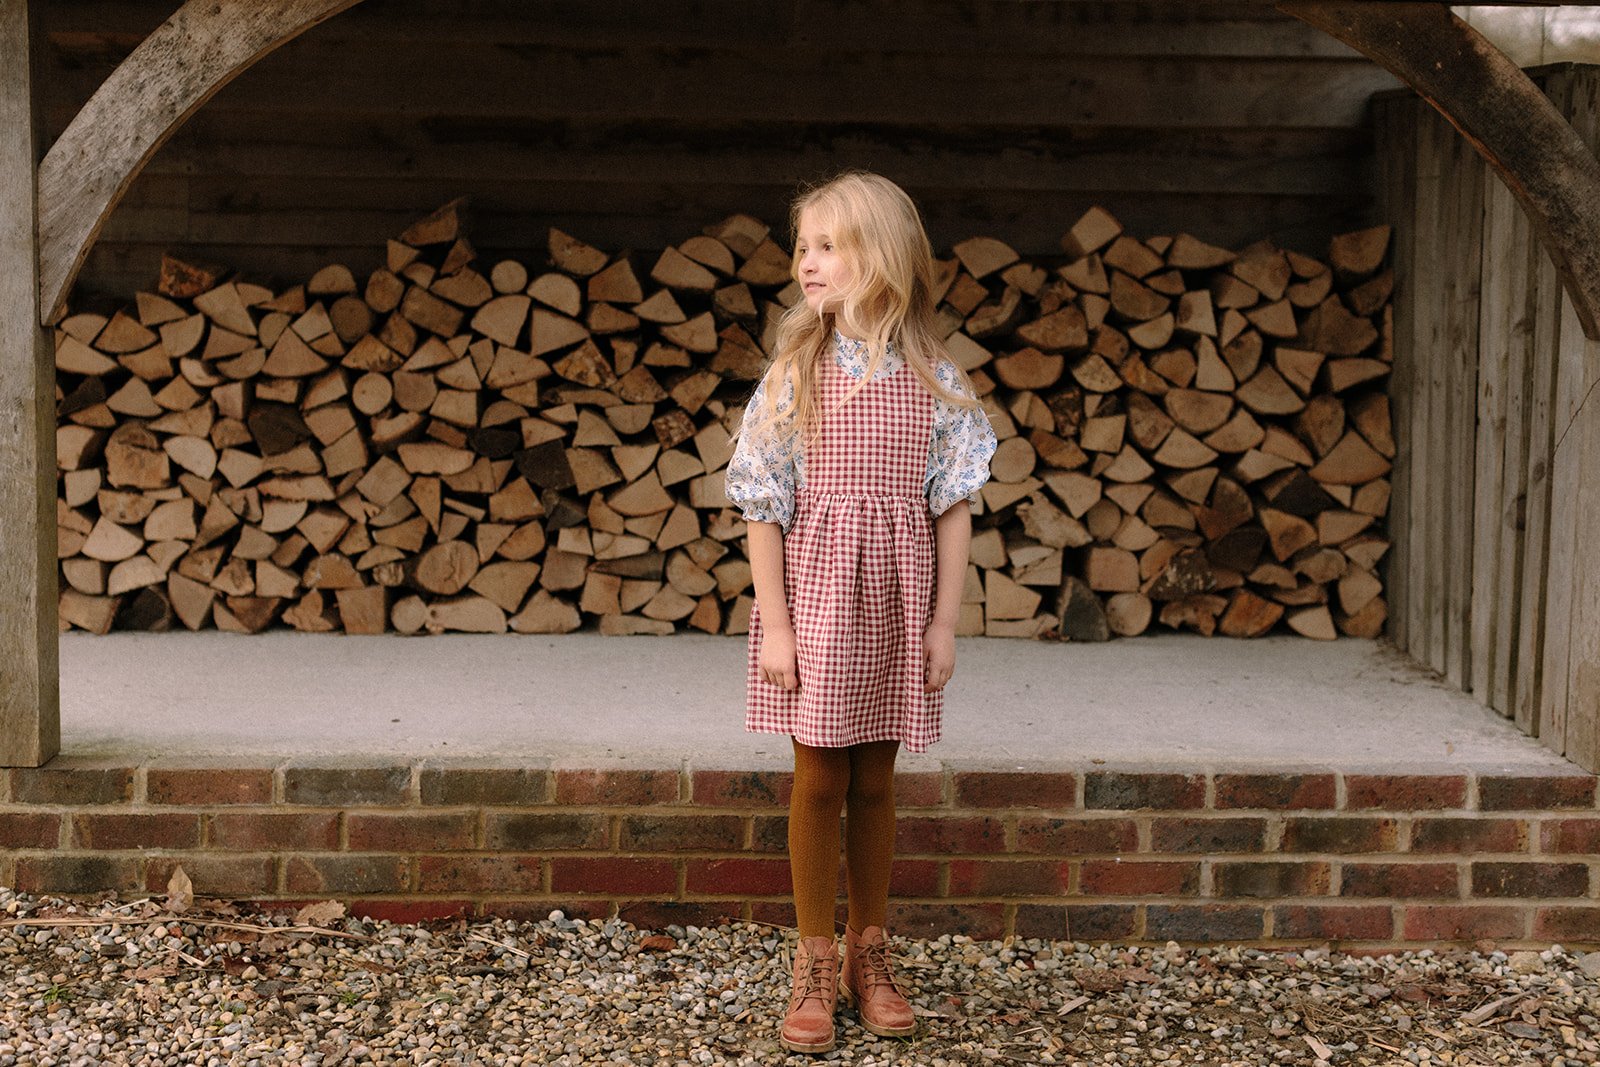  childrens fashion photographer girl in red gingham dress in front of logs 